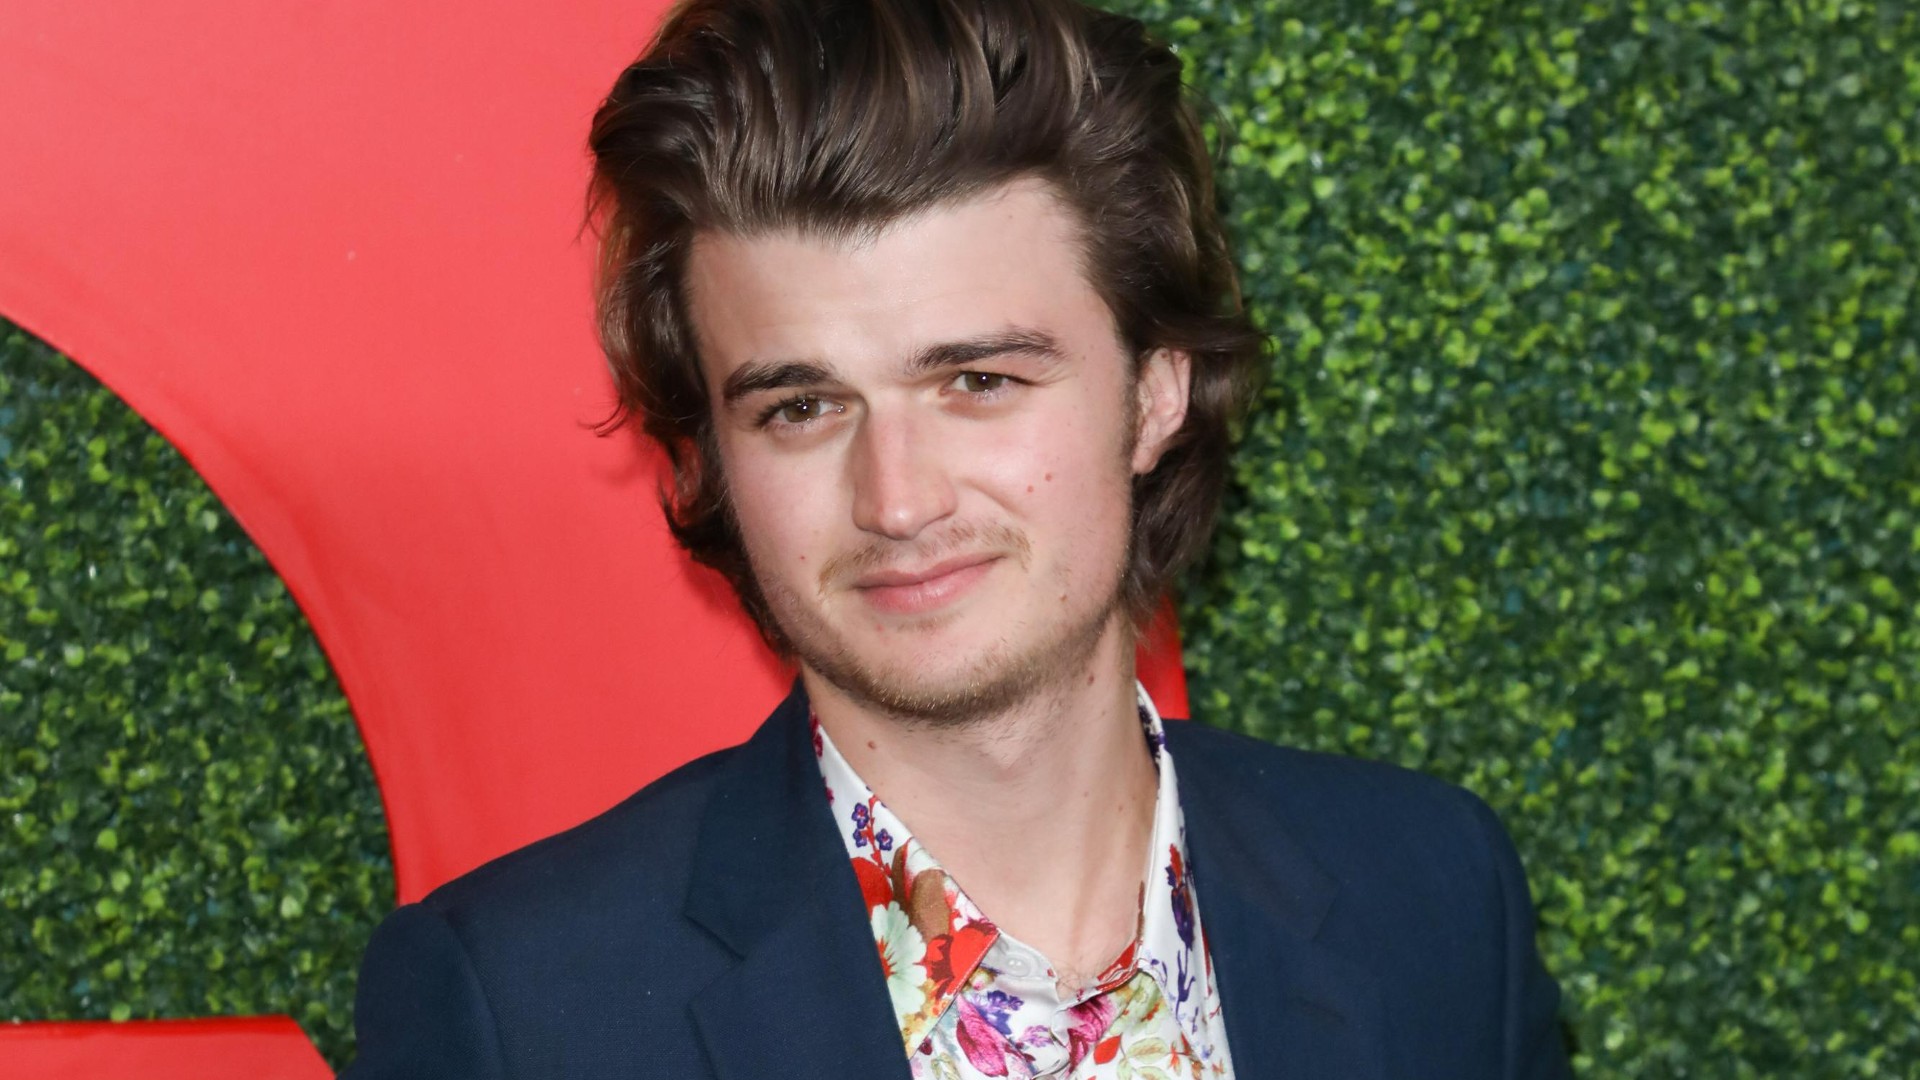 What Hair Products Does Joe Keery Use?